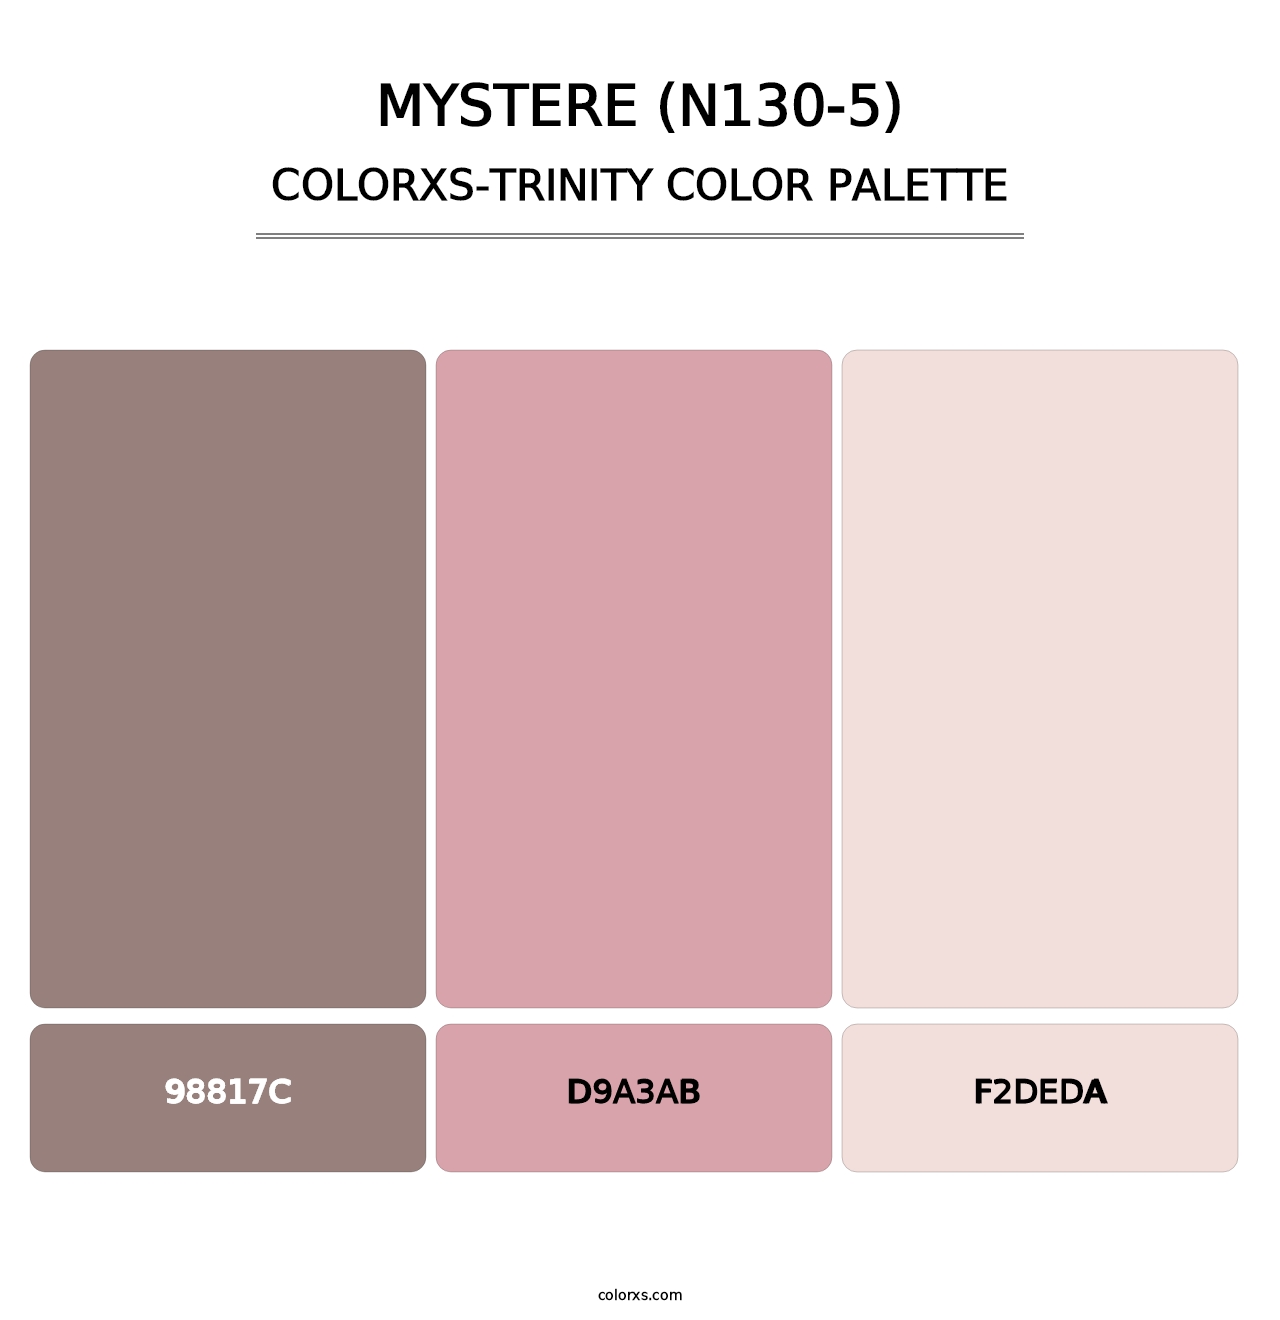 Mystere (N130-5) - Colorxs Trinity Palette